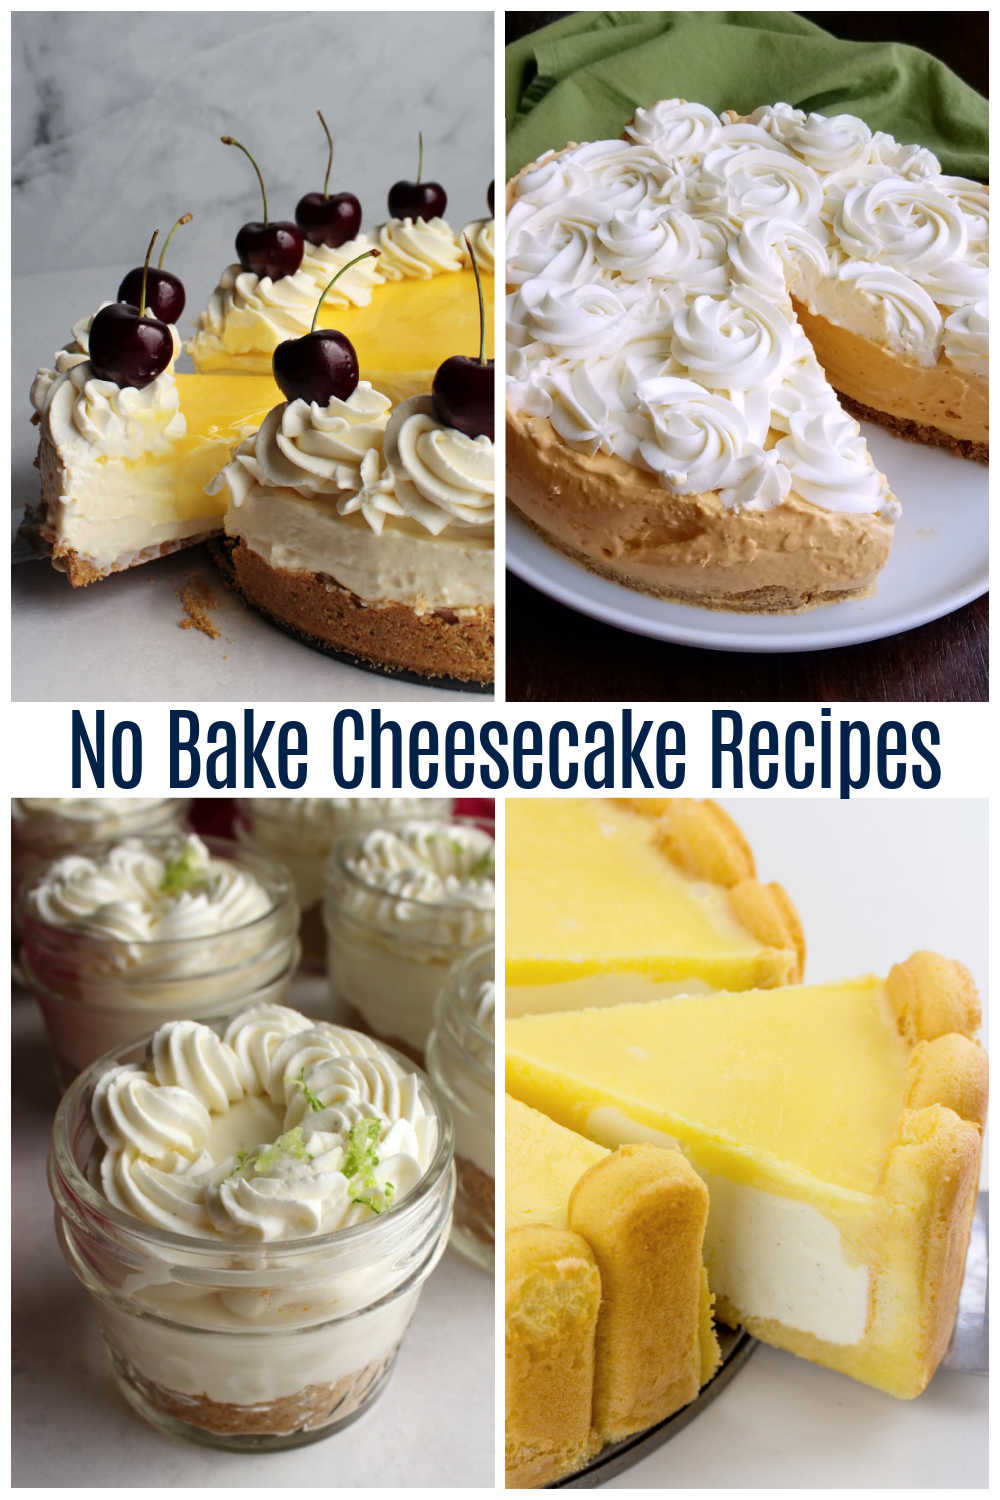 Do you want a delicious cheesecake without messing with the long bake time? Make one of these easy no bake cheesecake recipes for dessert!